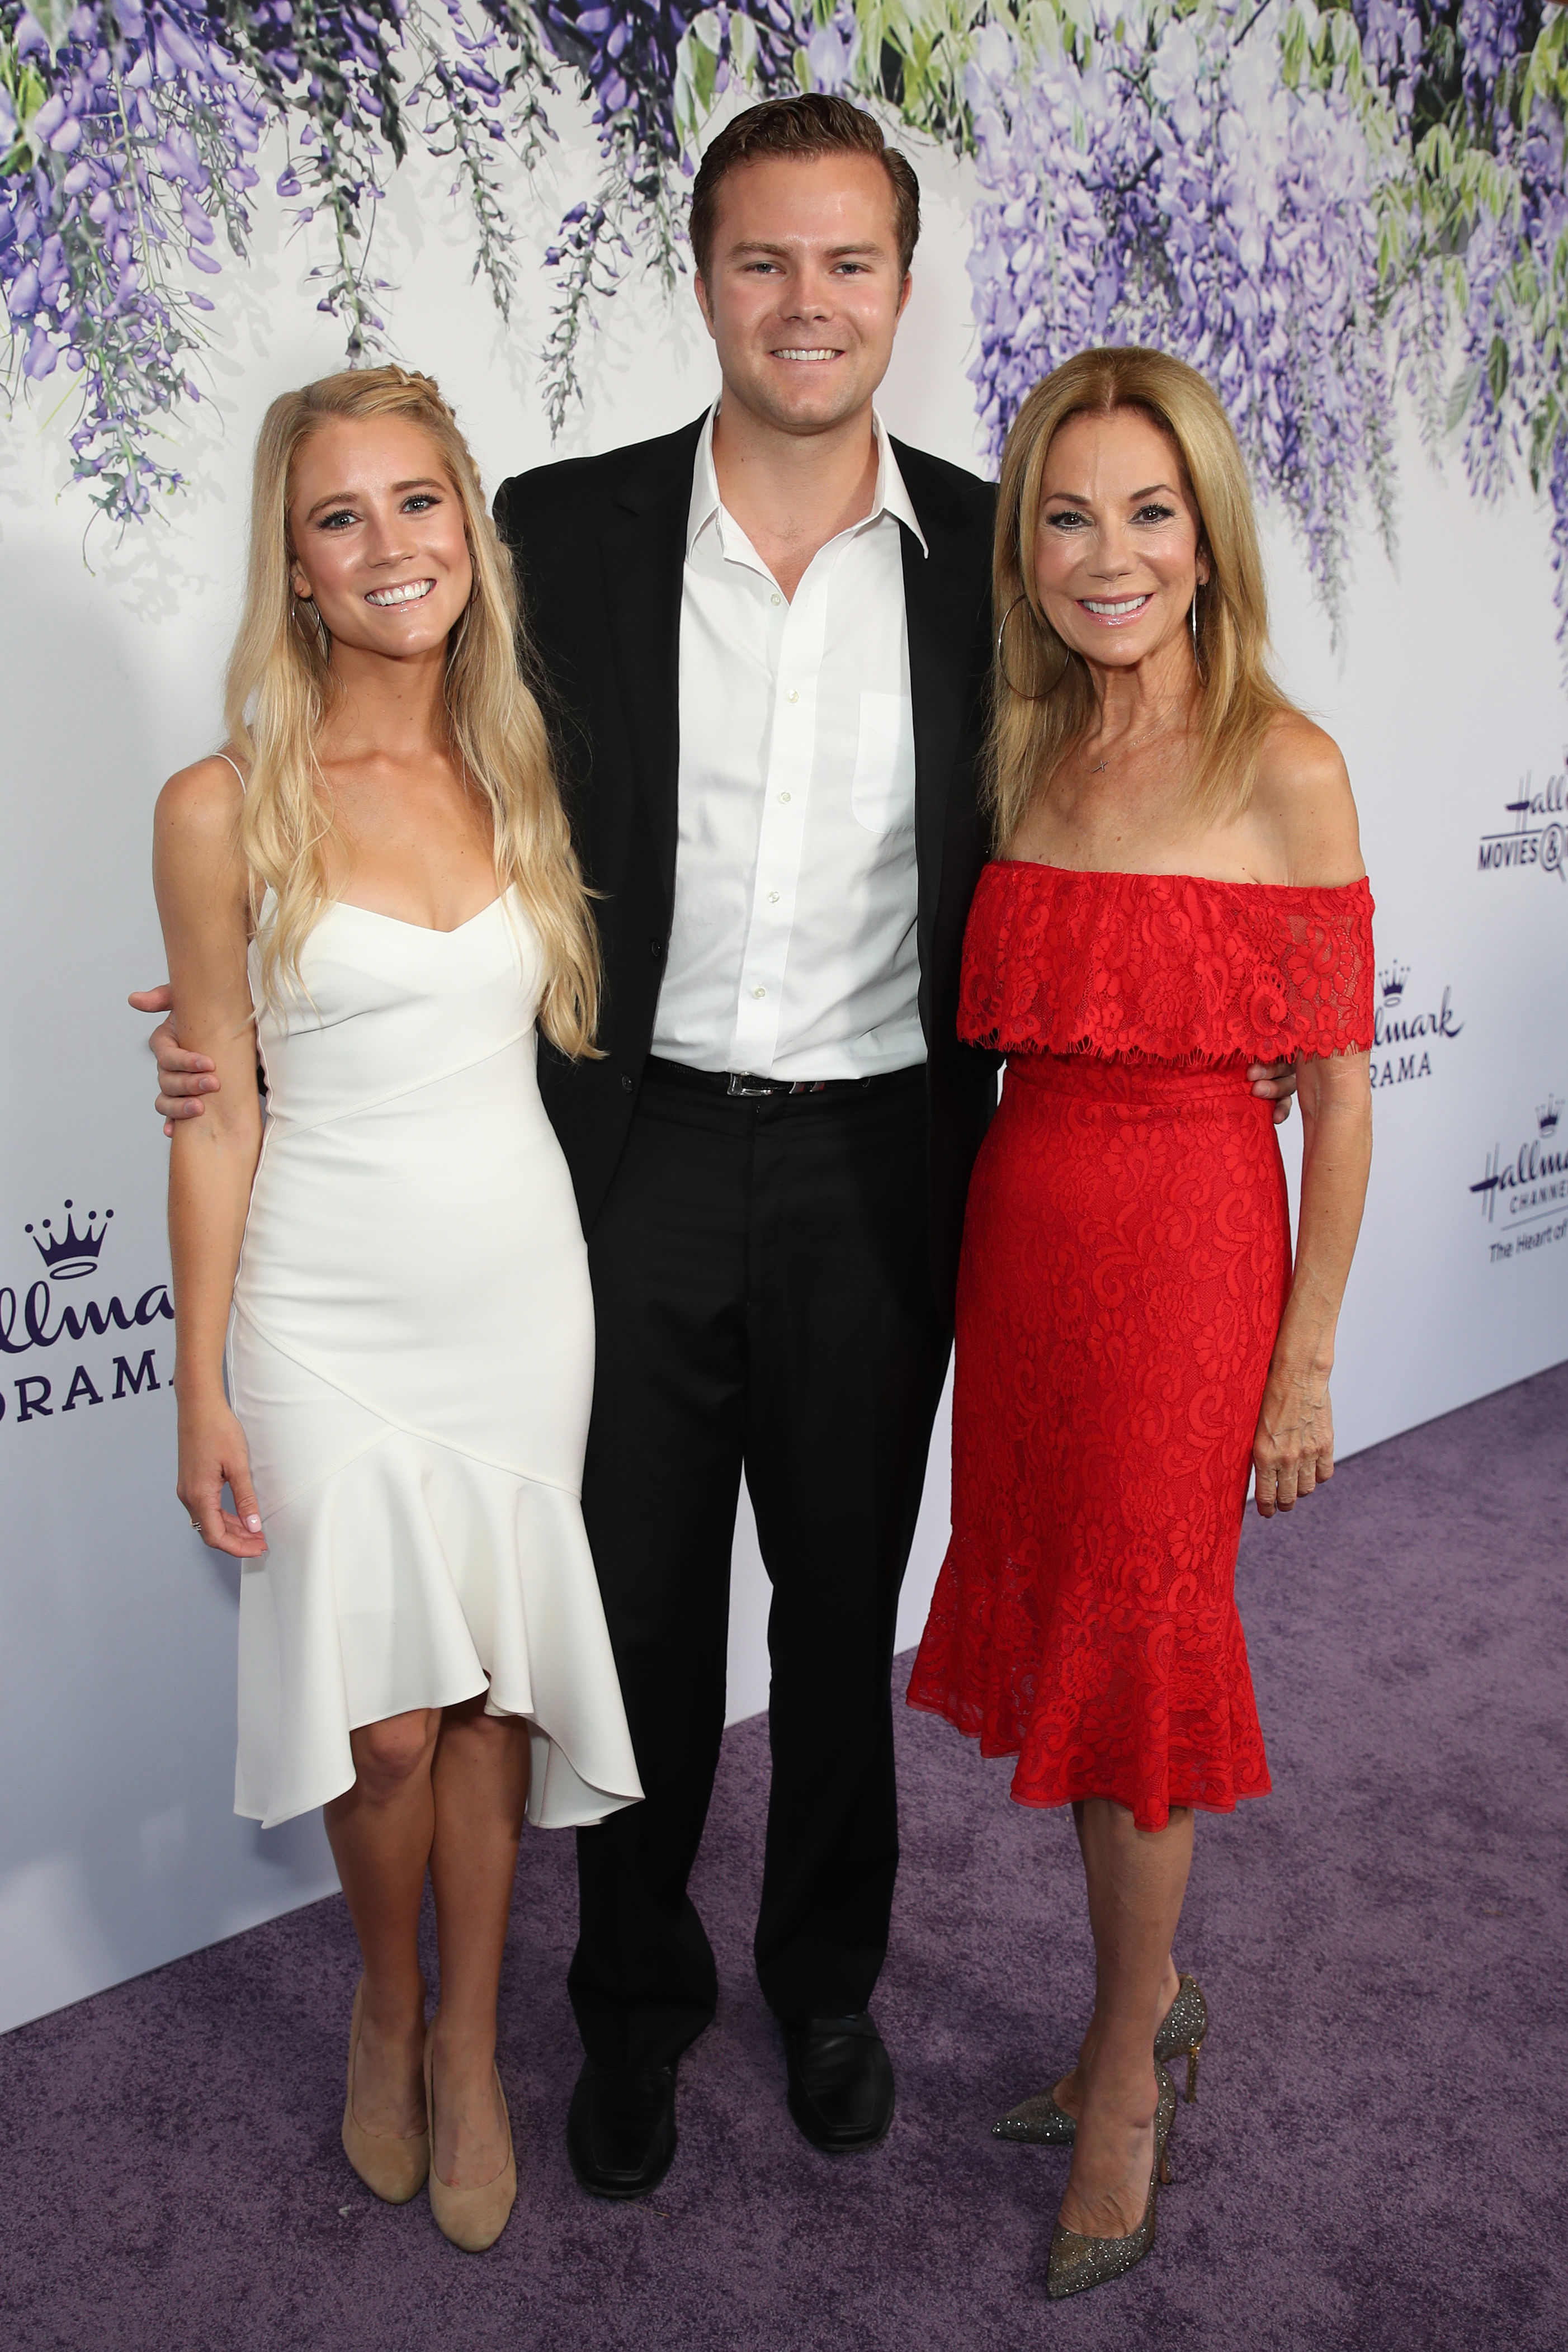 <p>Nearly three years after Frank Gifford's death, his all-grown-up kids joined their mom, "Today" host Kathie Lee Gifford, at Hallmark's Evening Gala during the network's TCA Summer Press Tour in Los Angeles on July 26, 2018. Cassidy Gifford, who was born in 1993, is now an actress with a Hallmark Channel movie, an episode of "Blue Bloods," the TV series "The Baxters" and more projects to her name. Brother Cody Gifford -- who was born in 1990 and looks an awful lot like his late father -- is a former script reader at Ridley Scott's Scott Free Productions and a former writers' assistant at Twentieth Century Fox, IMDB reports. After earning a master's degree from Oxford University, Cody founded Little Giant Productions, a film, TV and digital media company, in 2016.</p>